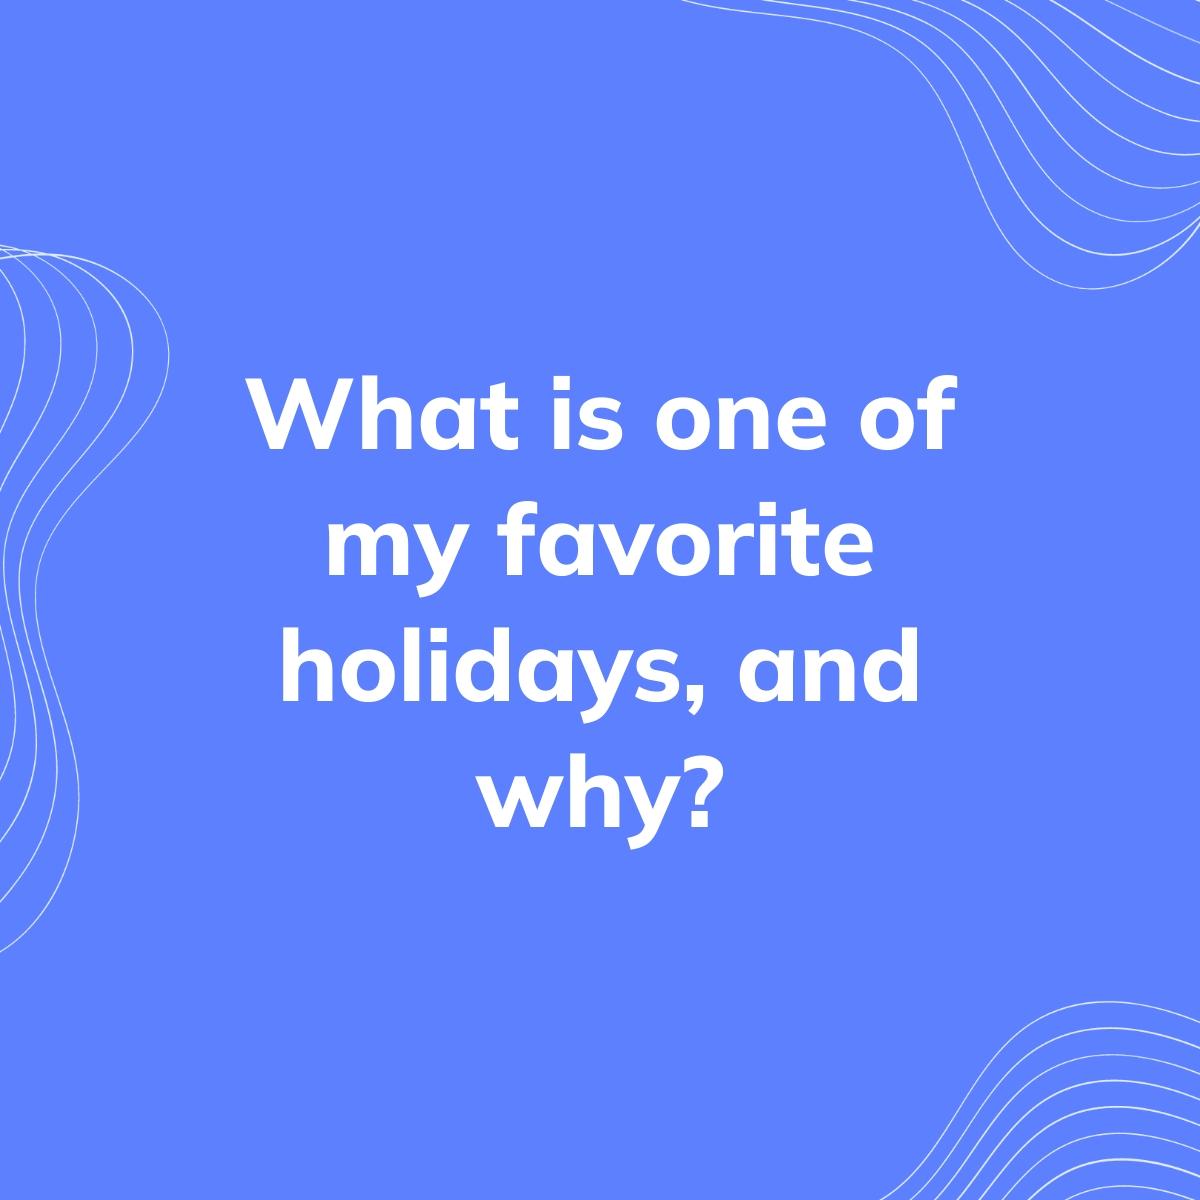 Journal Prompt: What is one of my favorite holidays, and why?